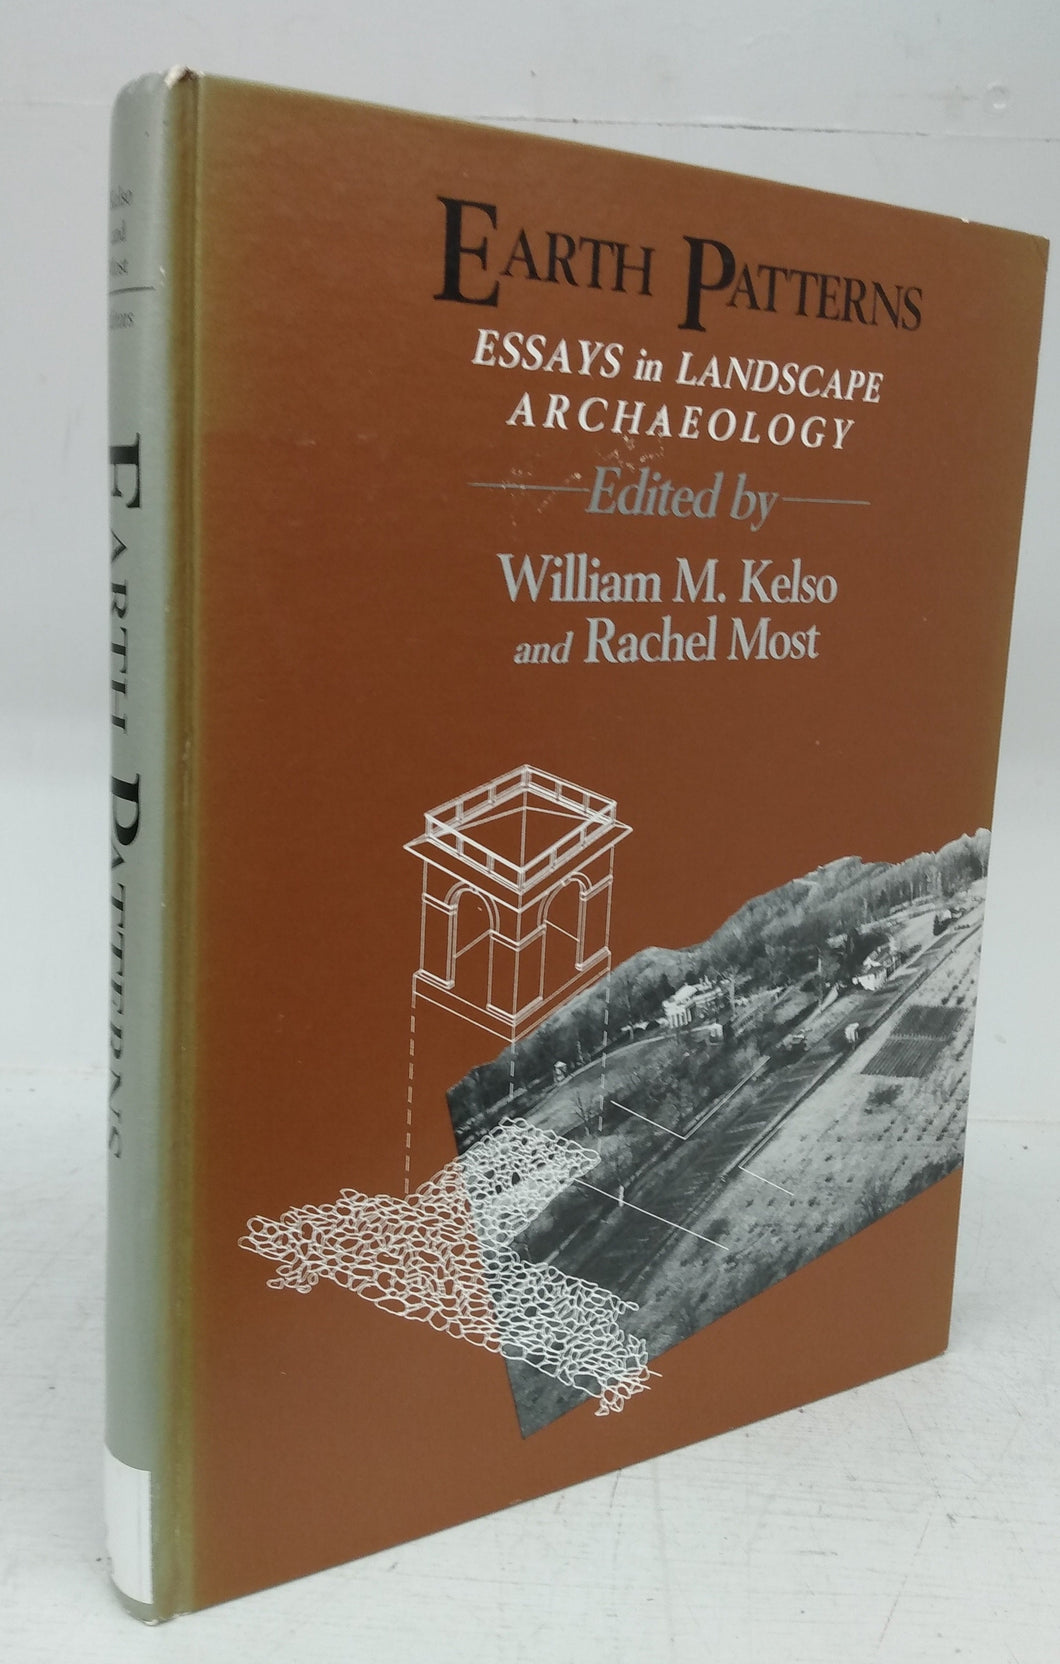 Earth Patterns: Essays in Landscape Archaeology